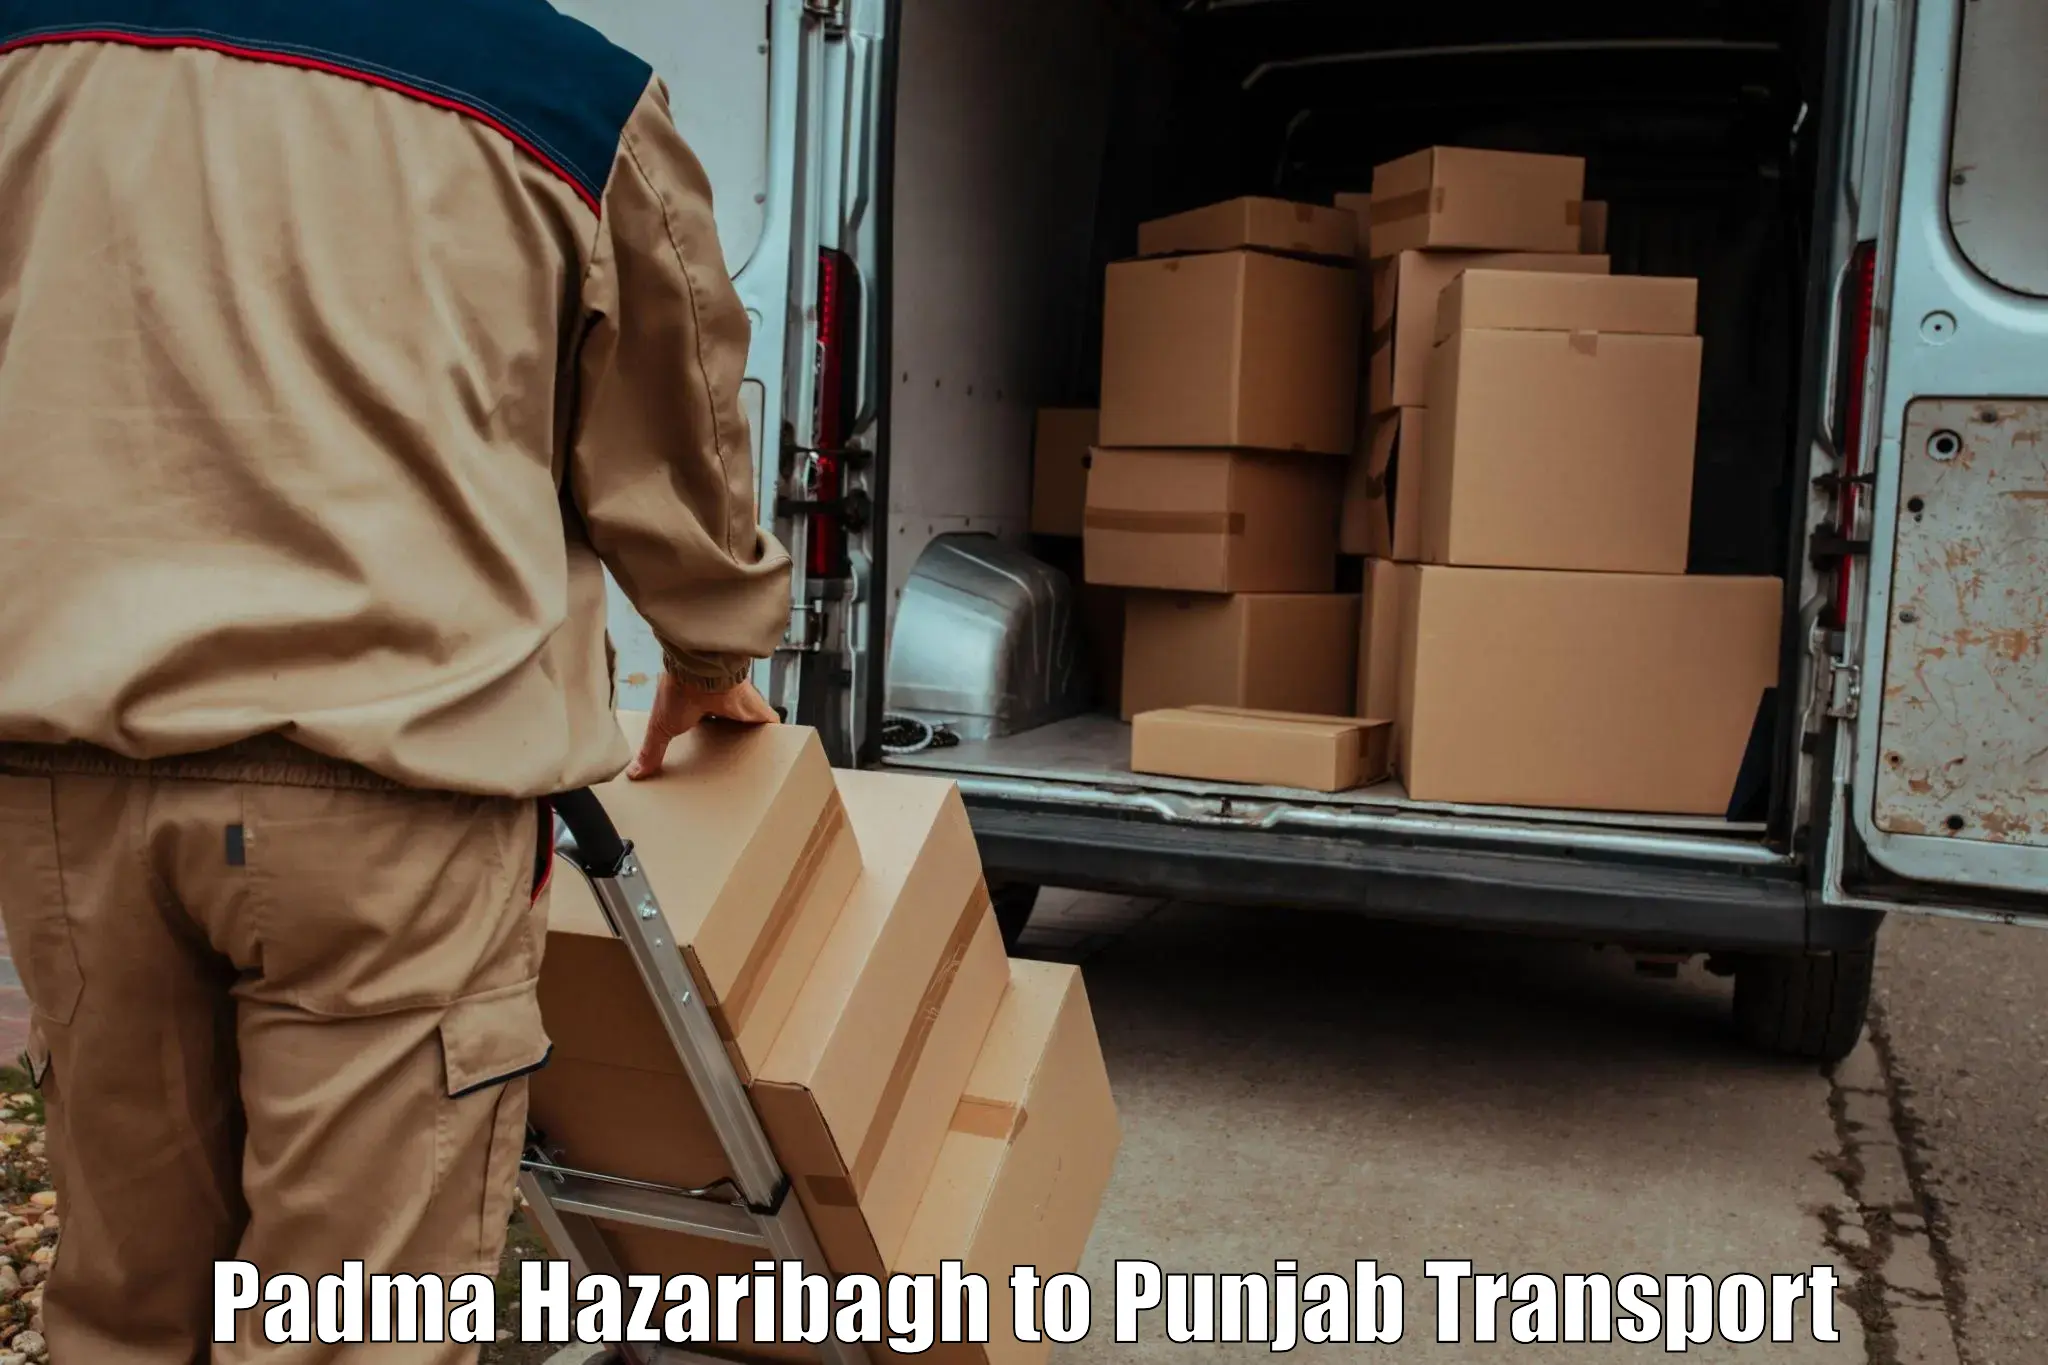 Lorry transport service Padma Hazaribagh to Sultanpur Lodhi